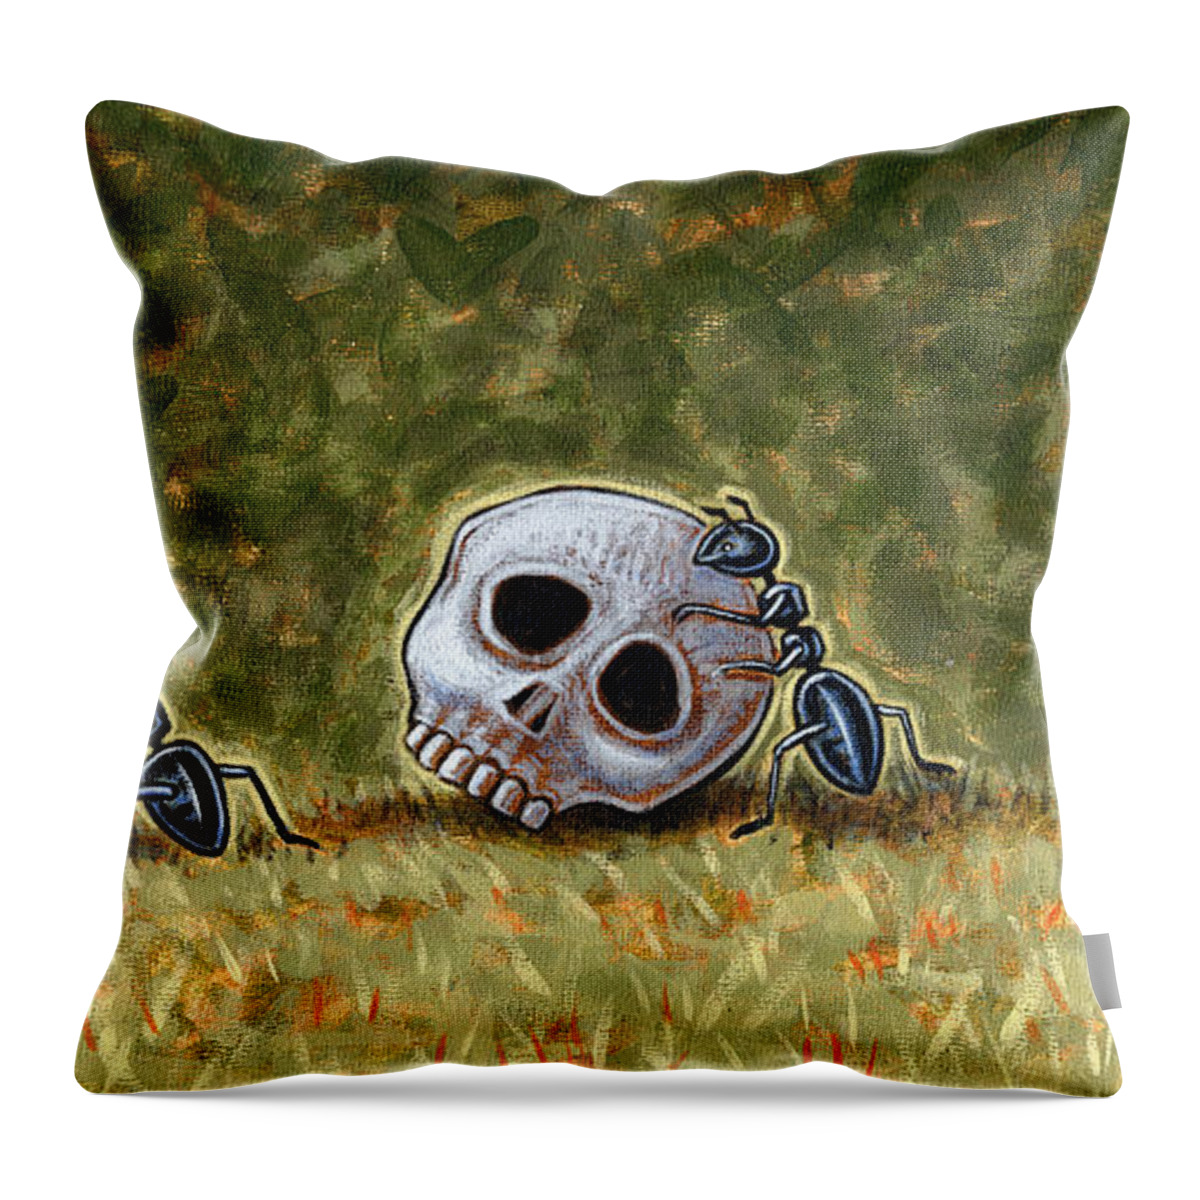 Skulls Throw Pillow featuring the painting Caprichos Calaveras #3 by Holly Wood